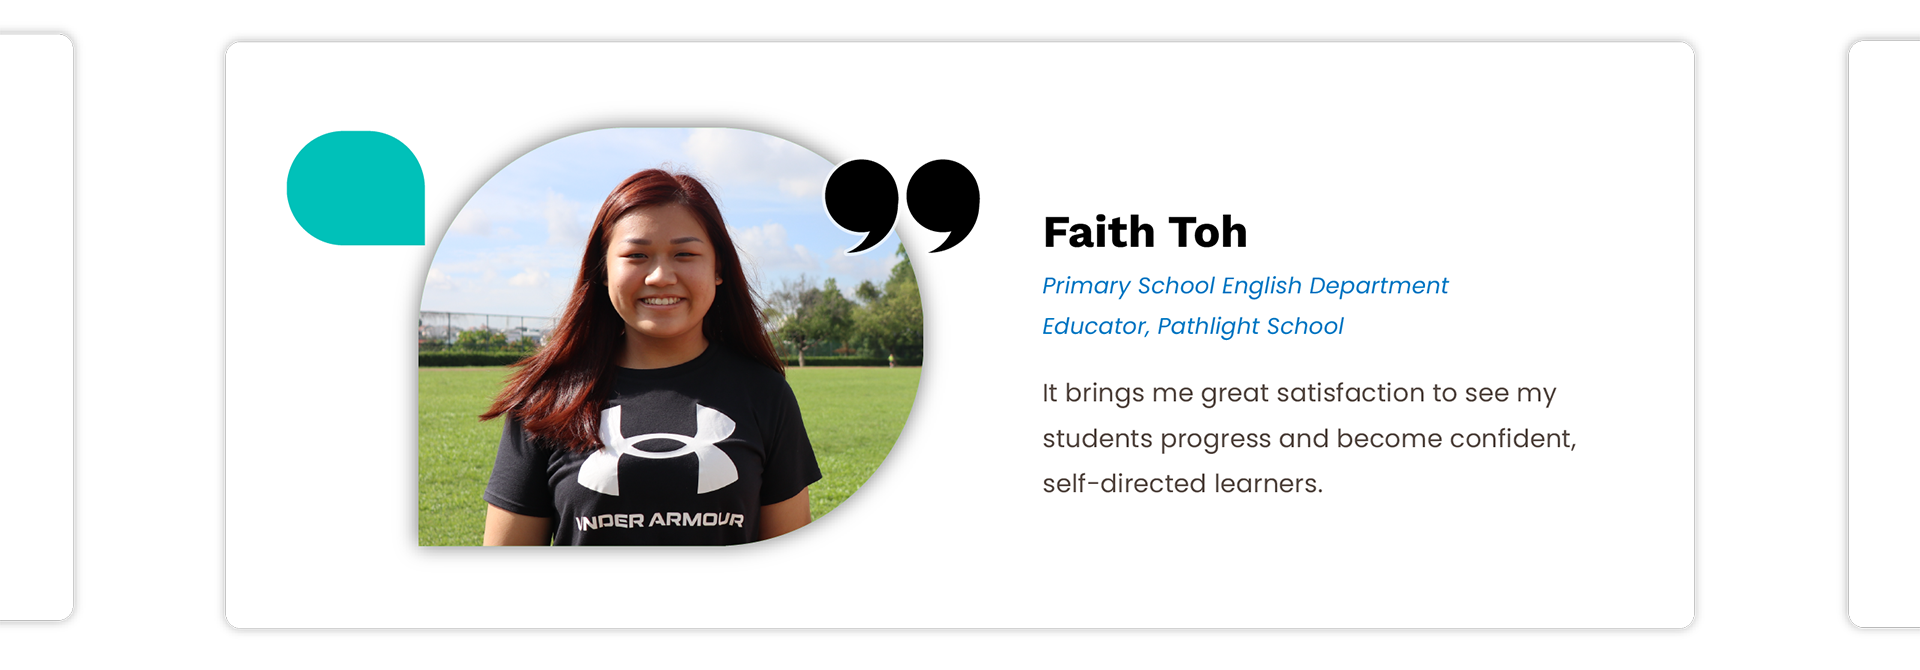 Faith Toh: It brings me great satisfaction to see my 
students progress and become confident, self-directed learners.